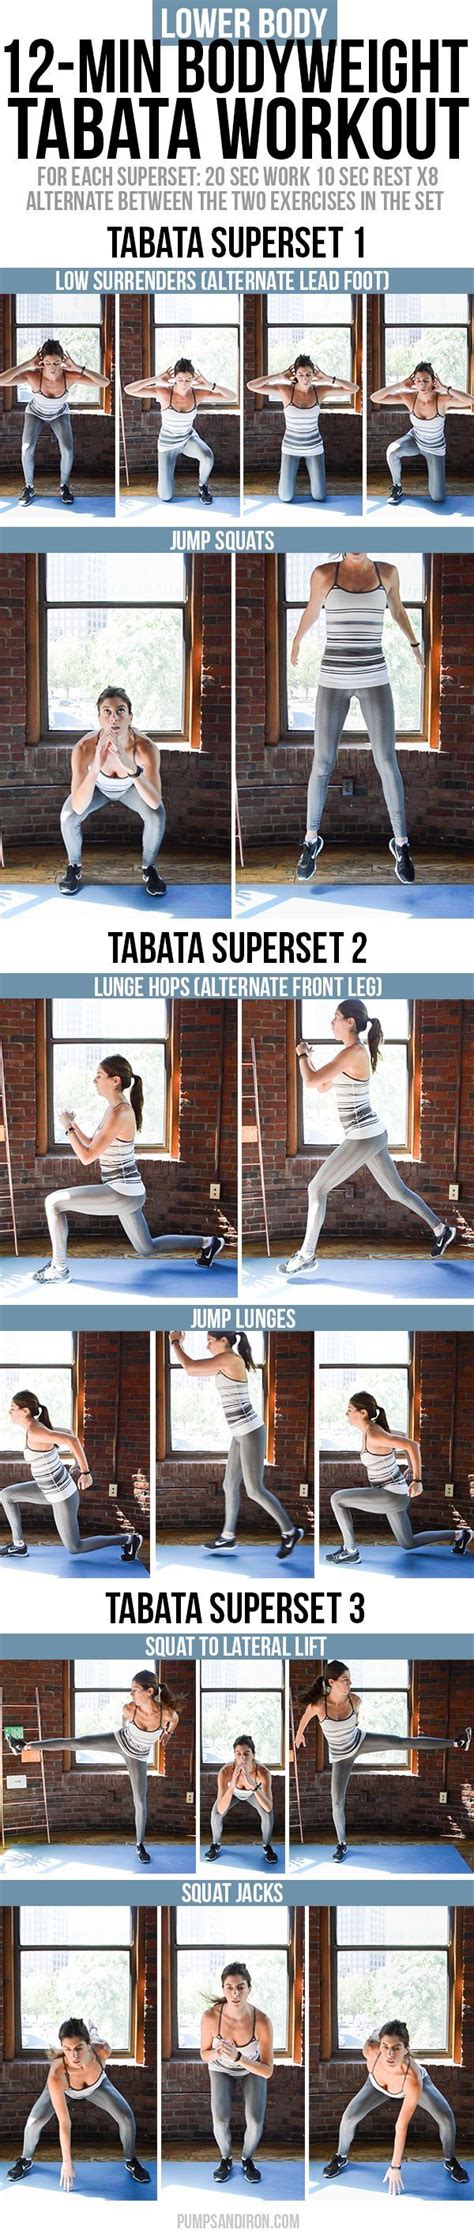 12 Minute Bodyweight Tabata Workout For Legs And Butt This Workout Is